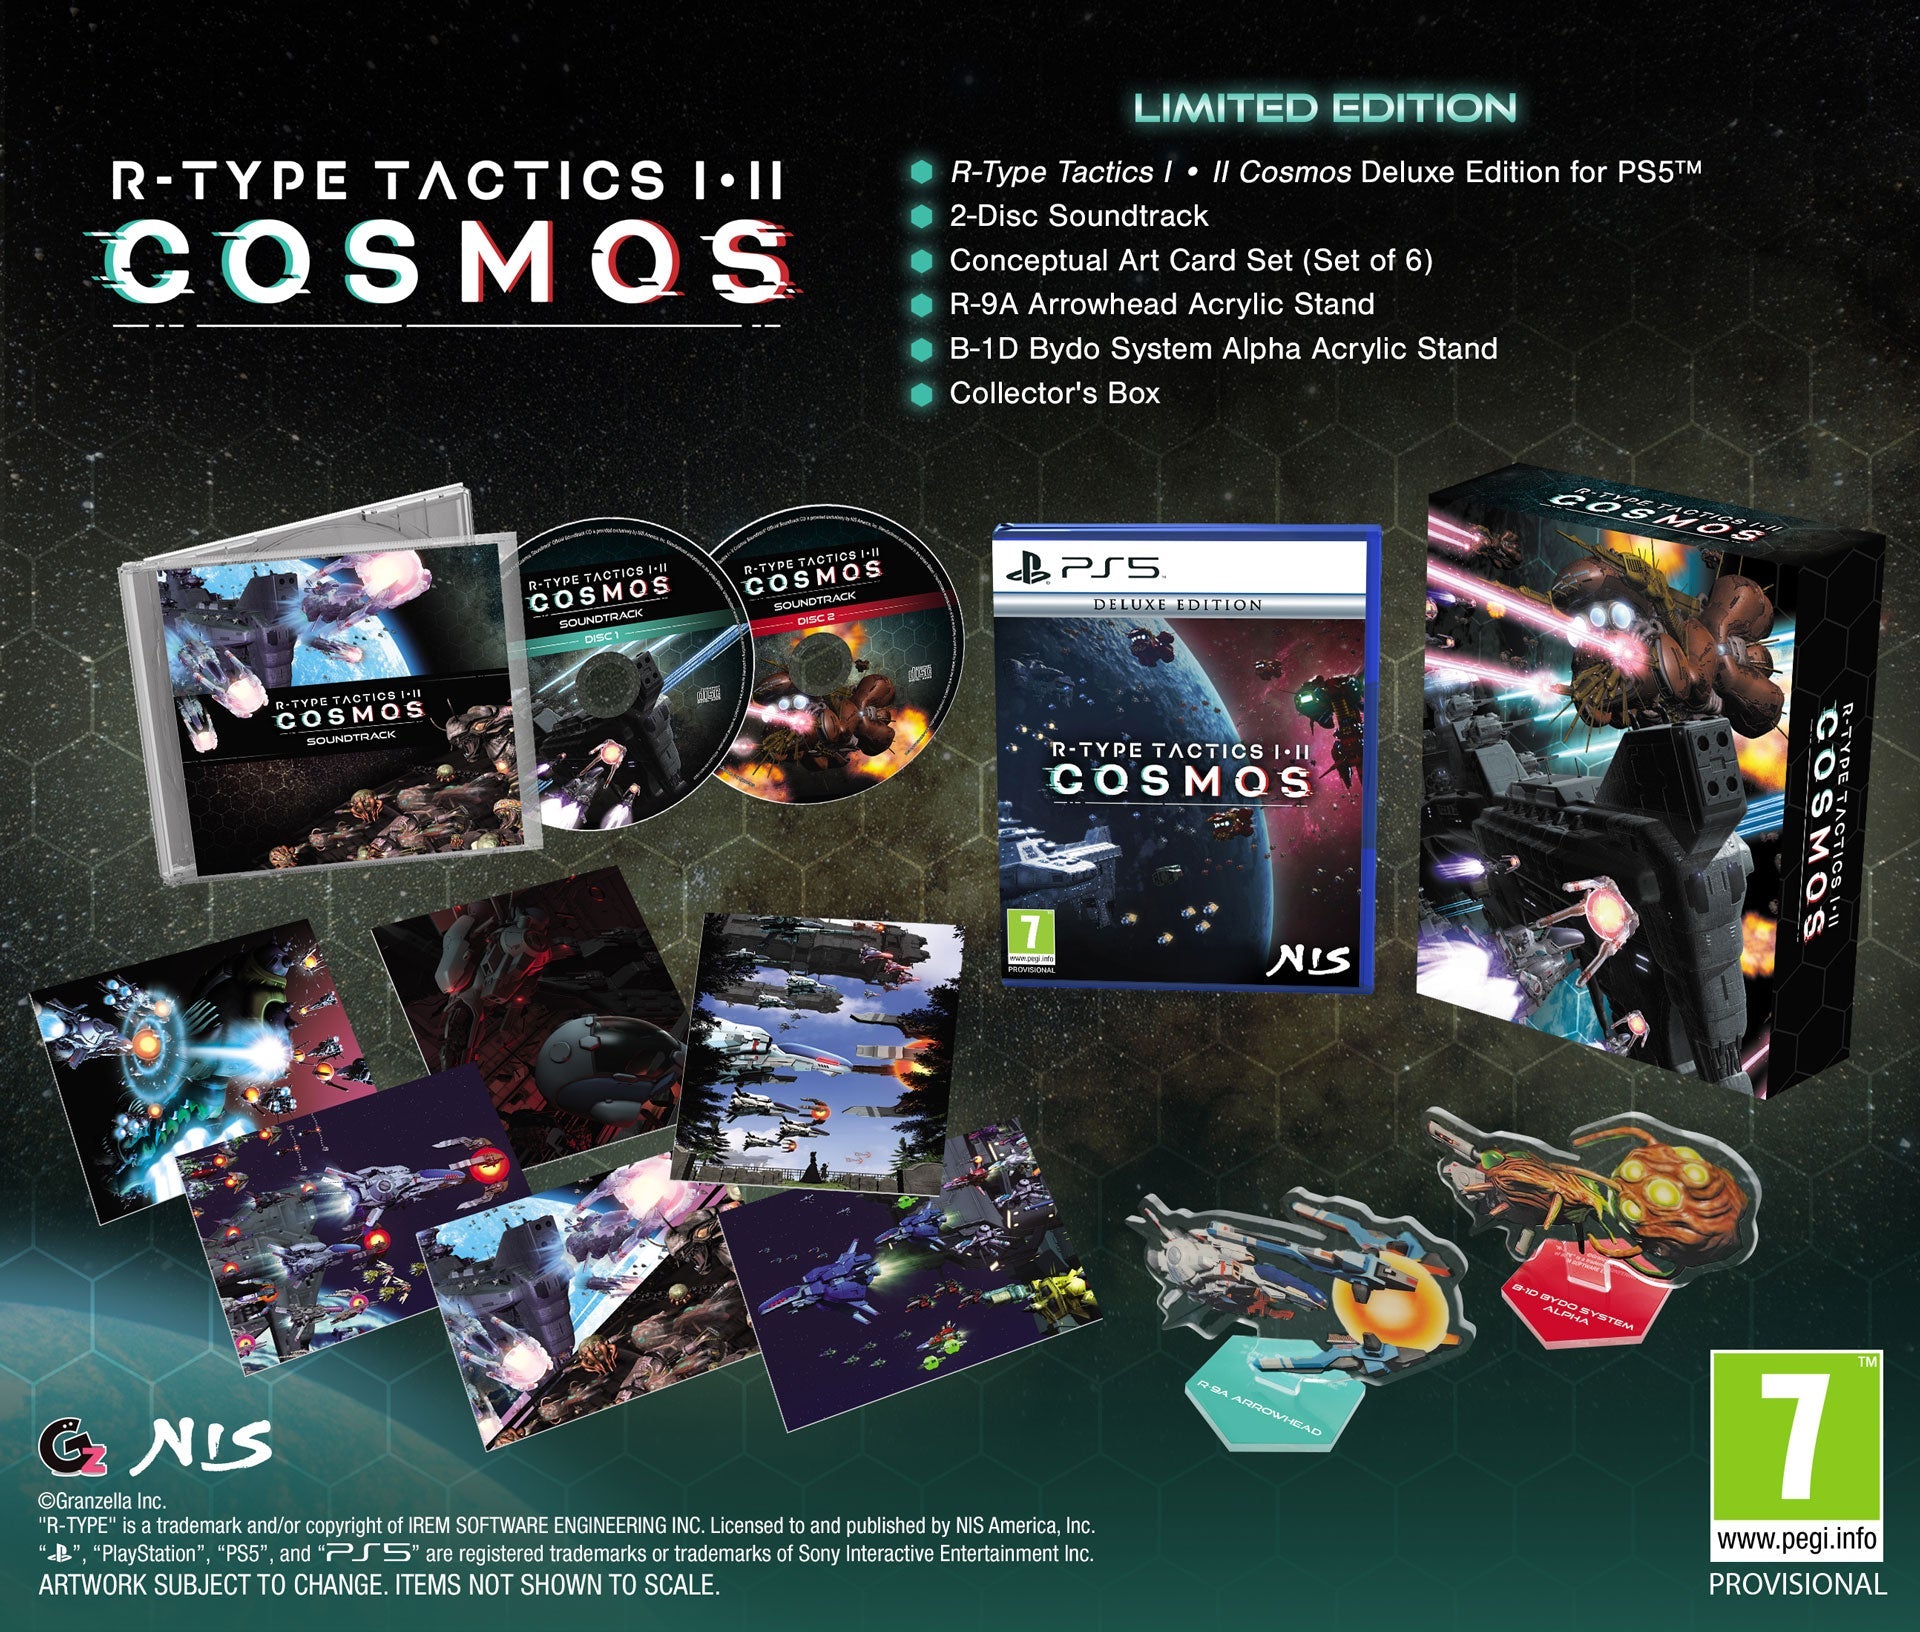 R-Type Tactics I • II COSMOS - Limited Edition - PS5®